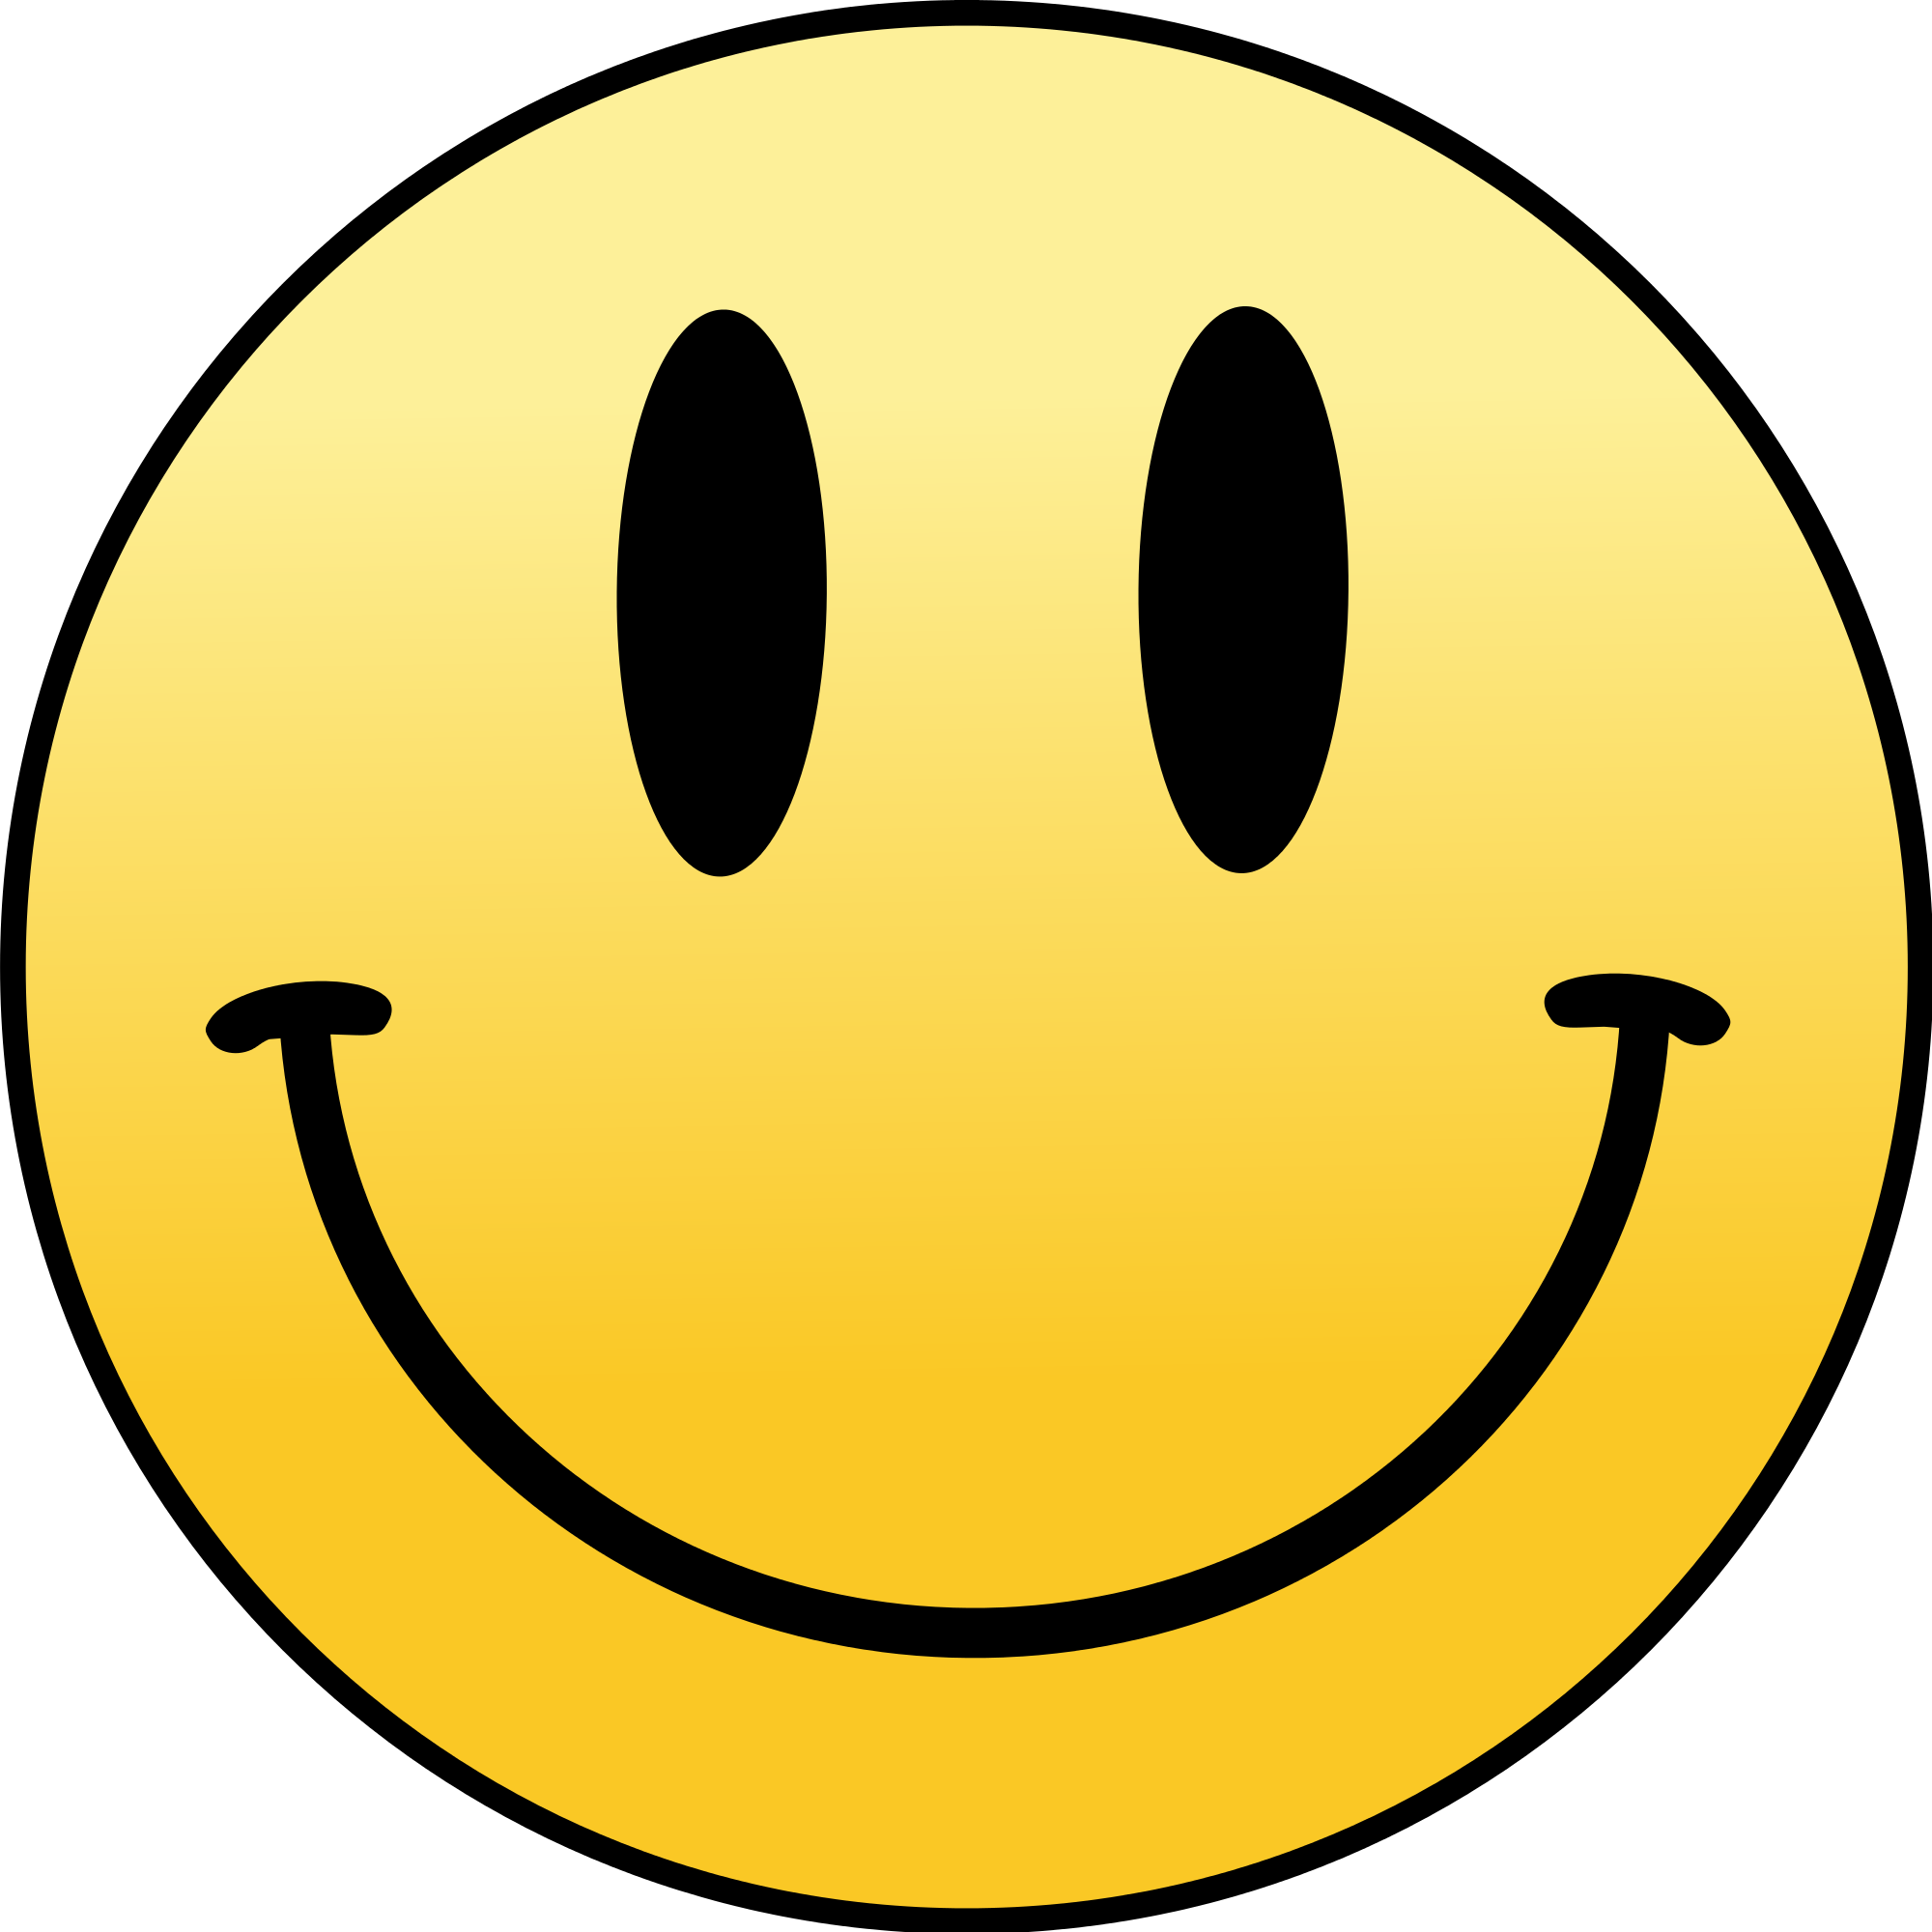 Transparent Smiley Face Images - IMAGESEE